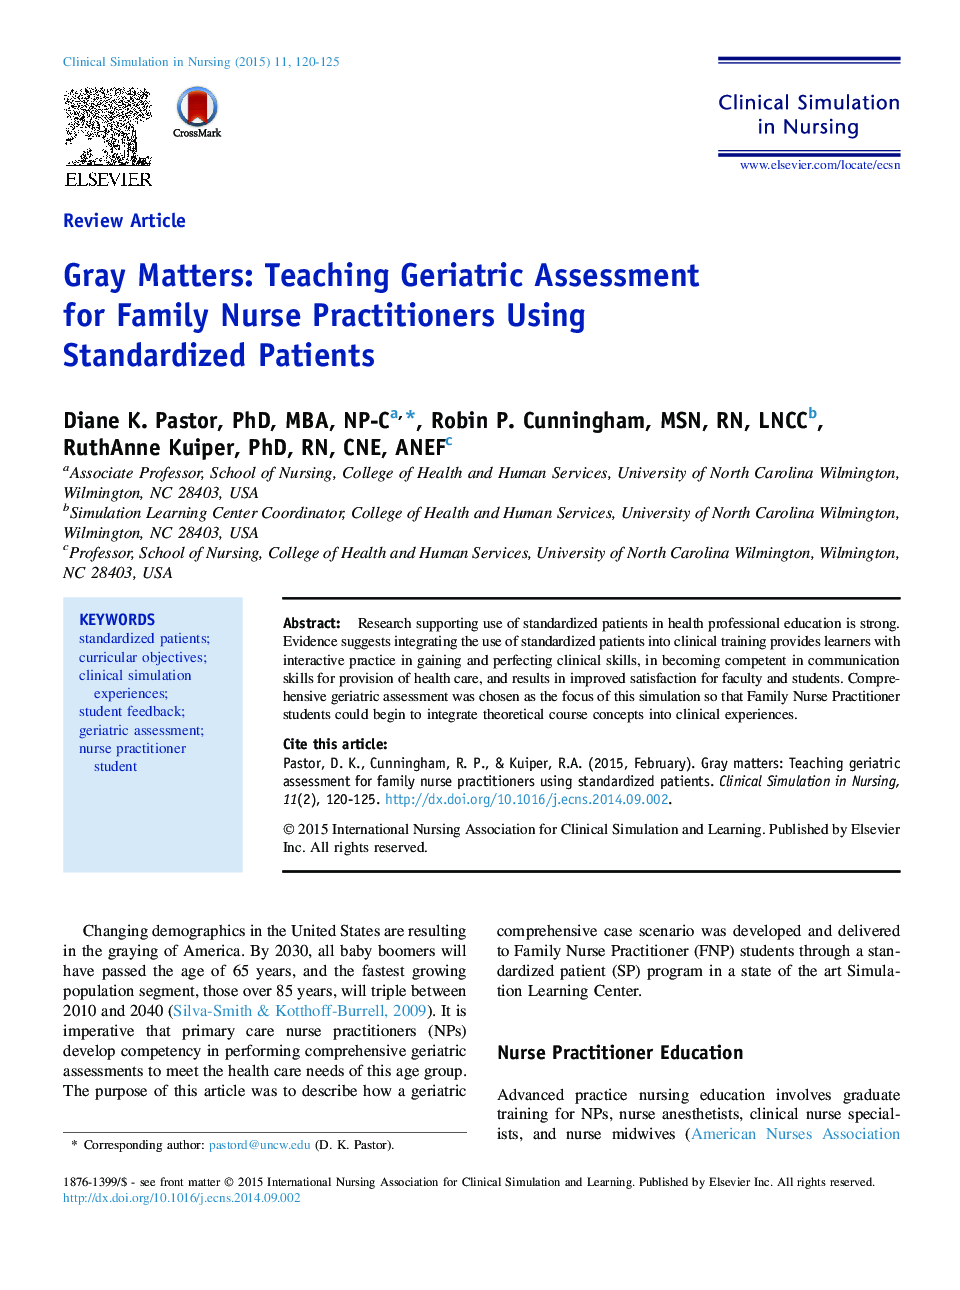 Gray Matters: Teaching Geriatric Assessment for Family Nurse Practitioners Using Standardized Patients